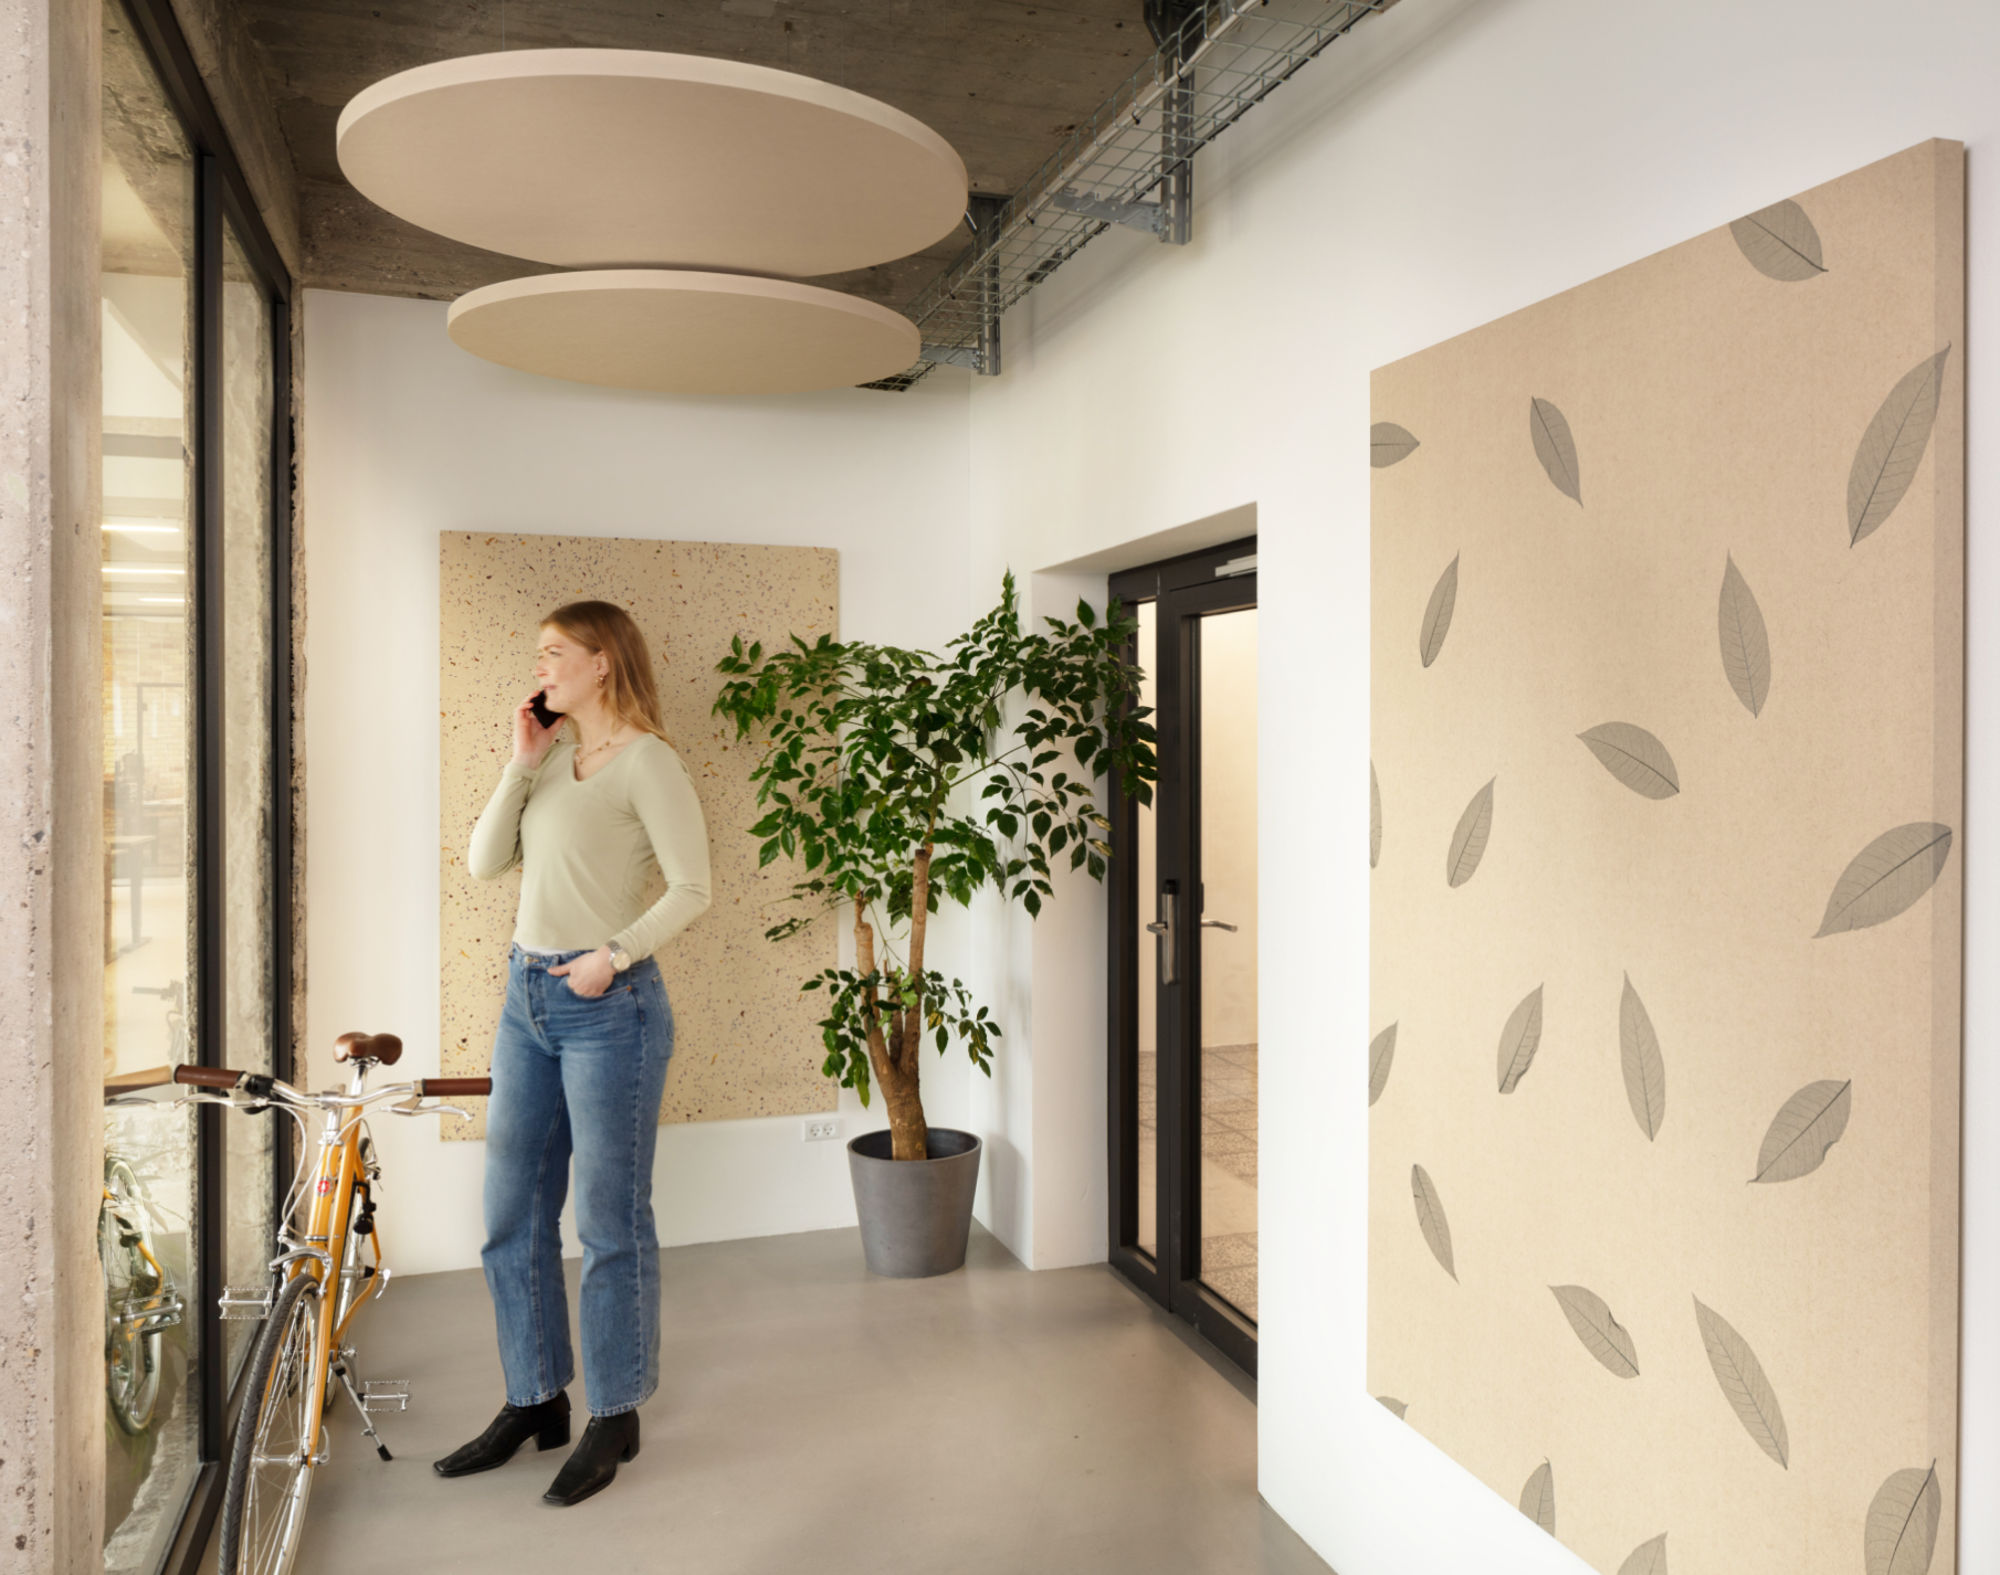 Create healthy spaces with Rockfon senses acoustic panels